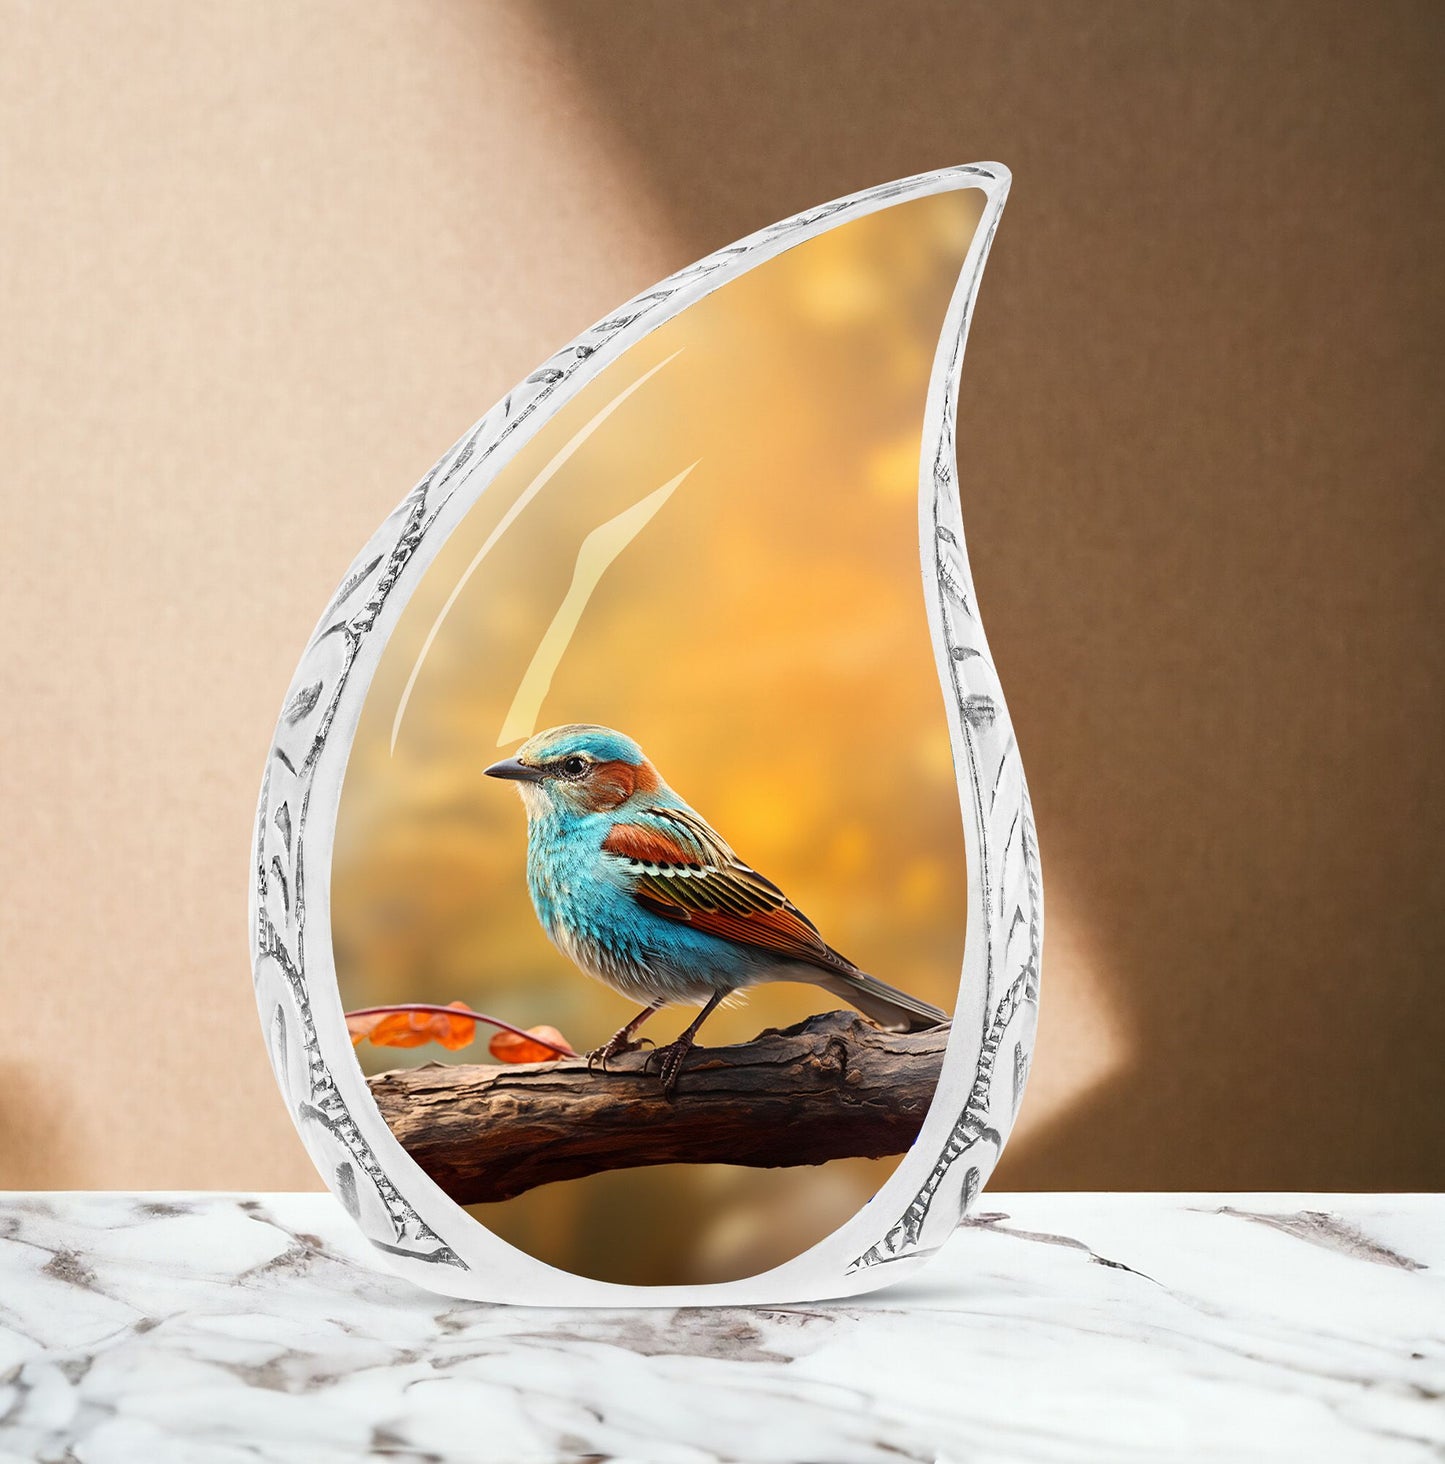 Large, colorful Sparrow themed urn for adults, a unique metal cremation urn designed for women to securely hold human ashes.